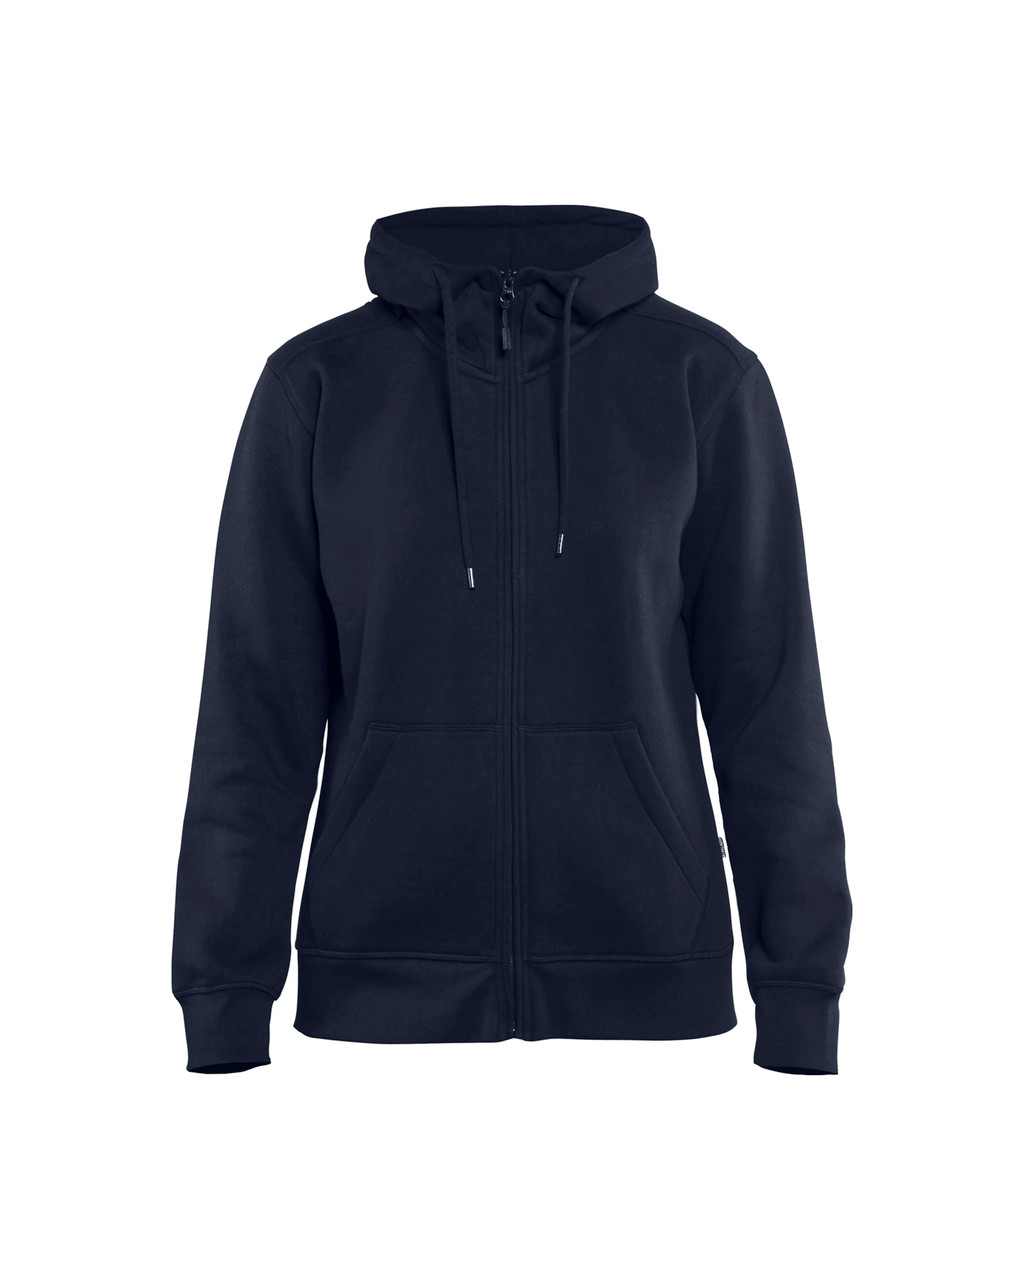 Craftsman Hardware supplies BLAKLADER workwear range including Hoodie with Full Zip for the Uniforming, Branding to support Women in Construction in Sydney